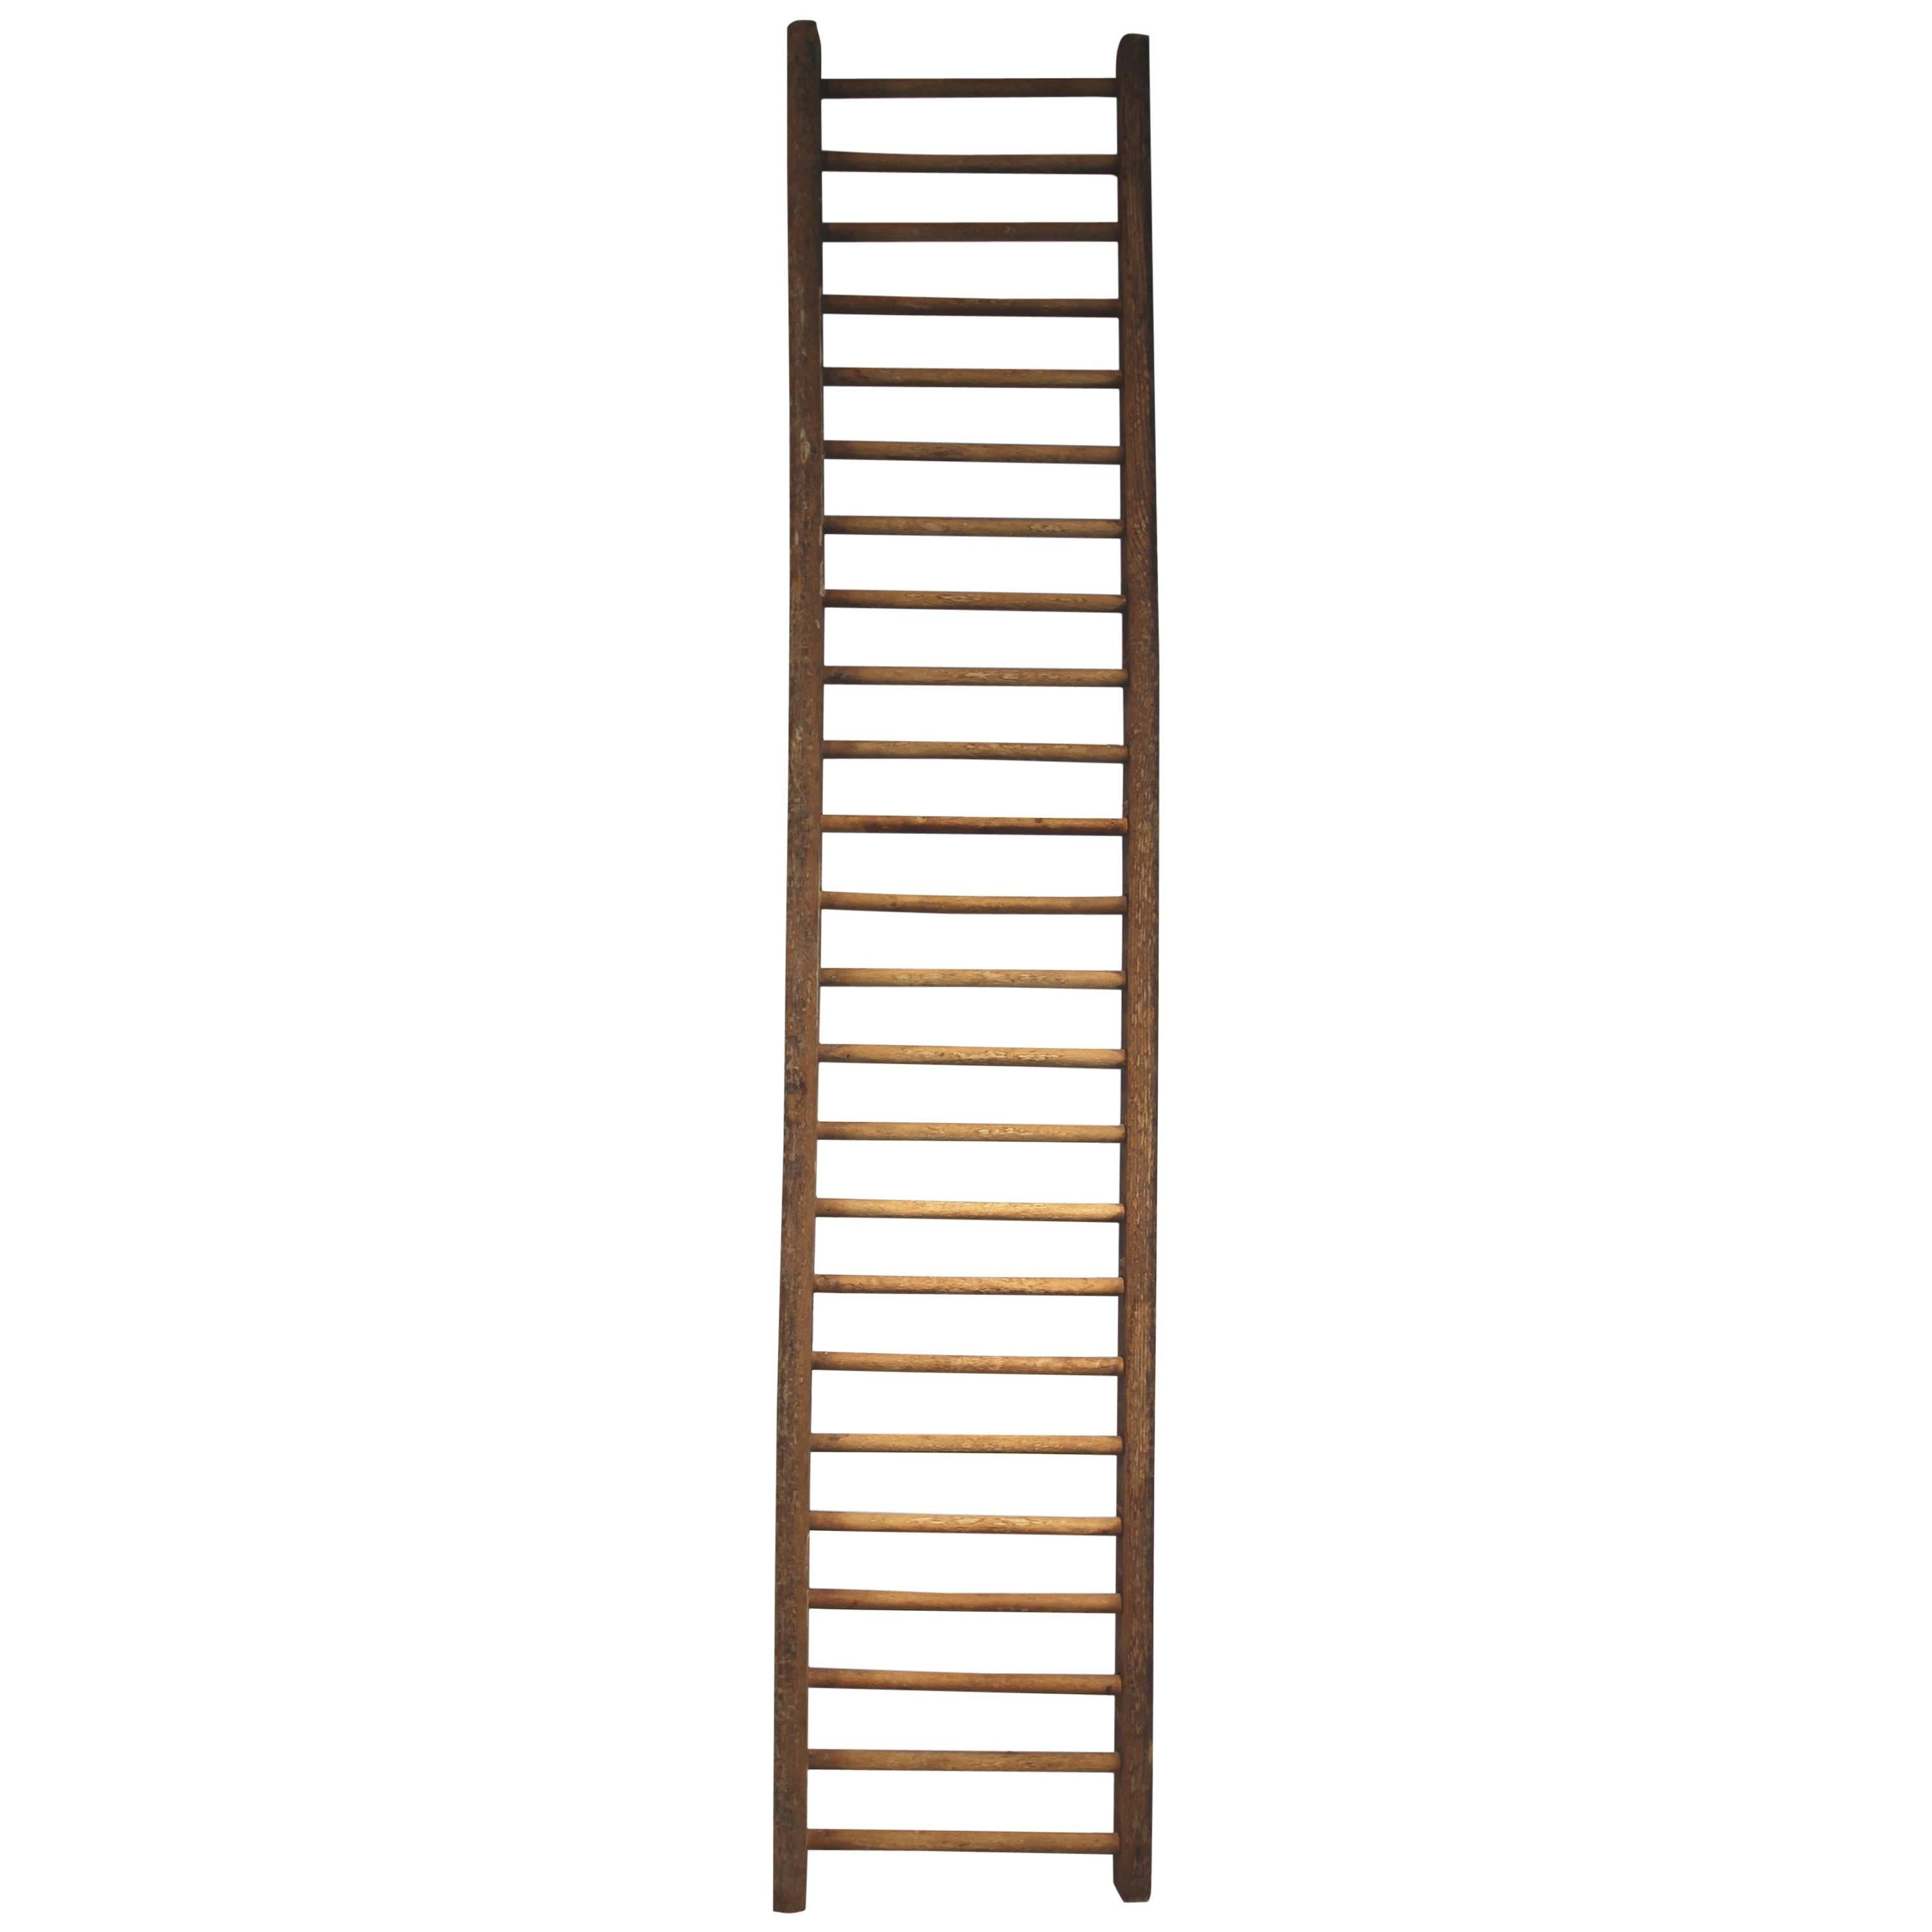 Small Herb Drying Ladder, American, Early 20th Century